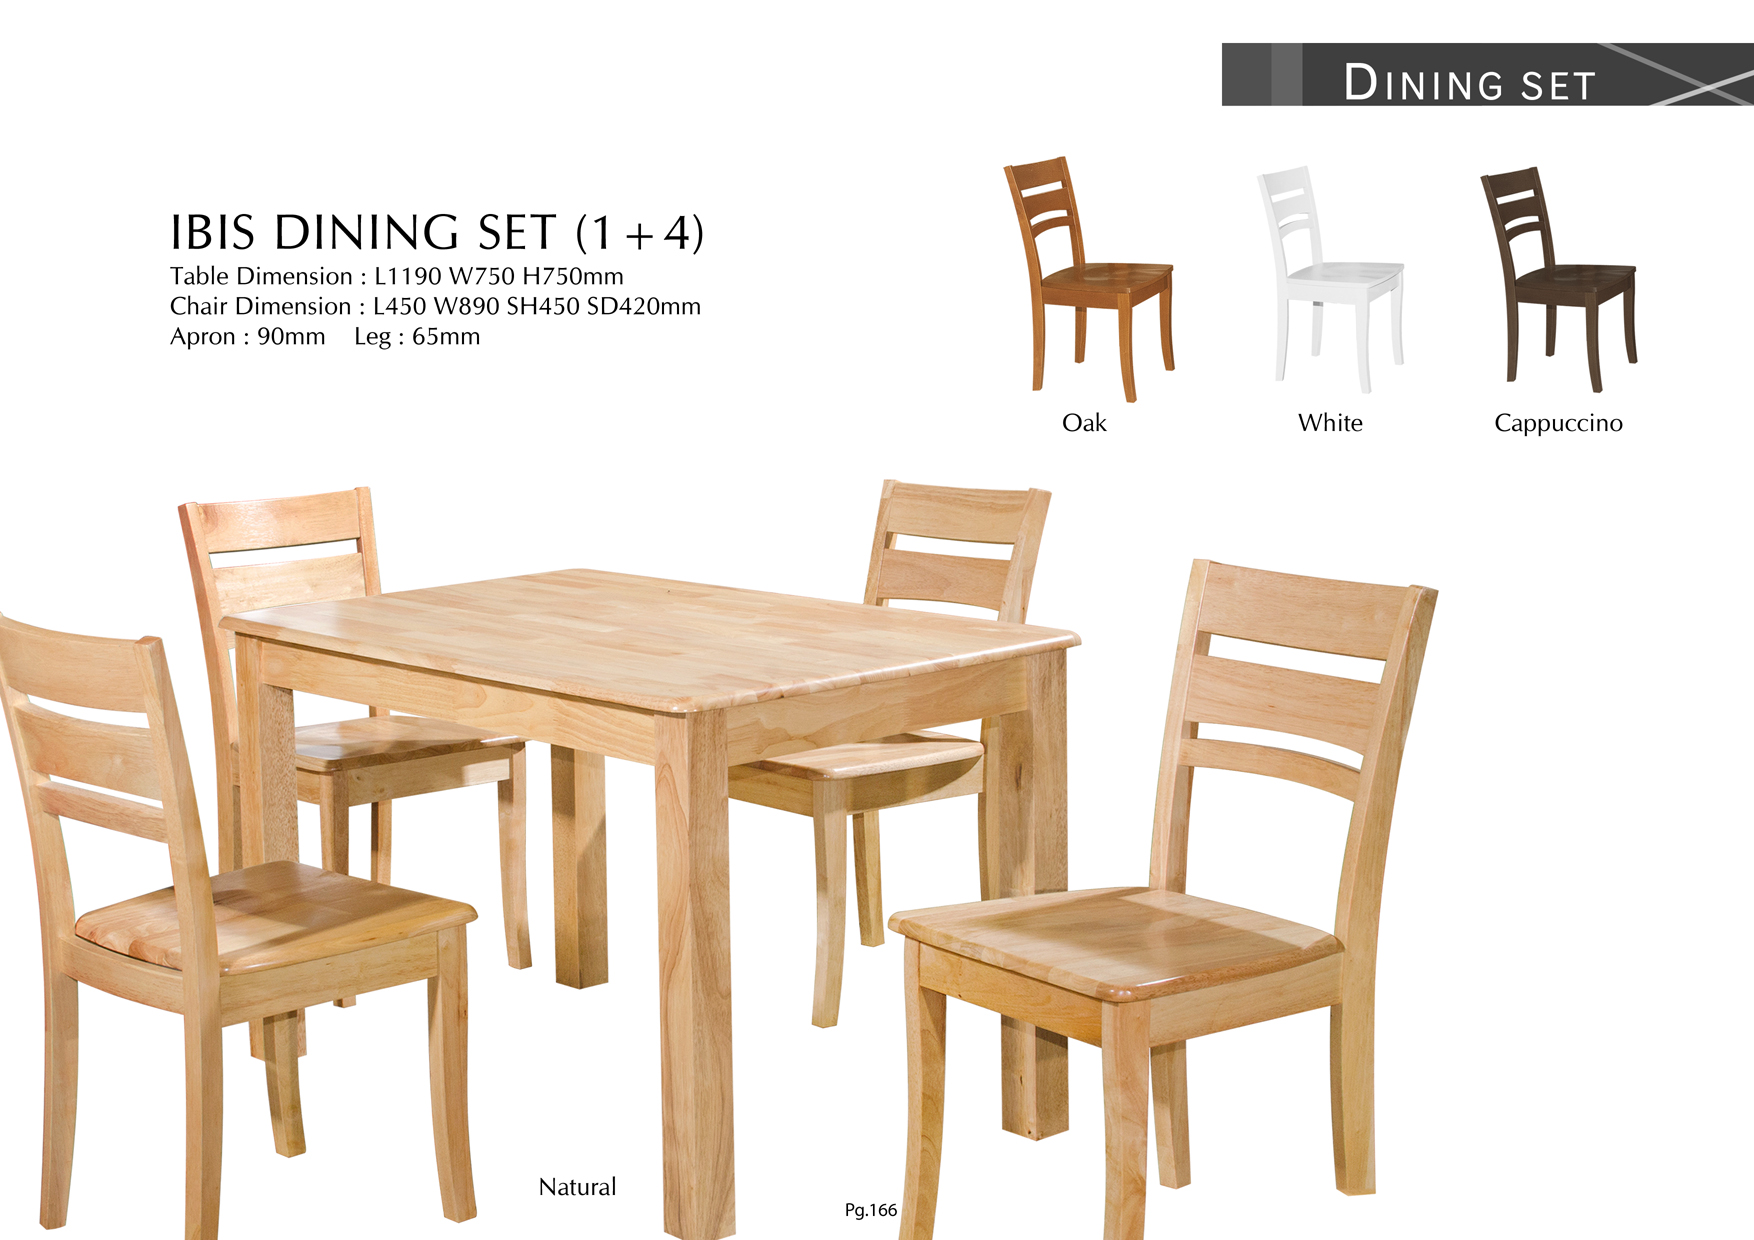 Product: PG166. IBIS DINING SET